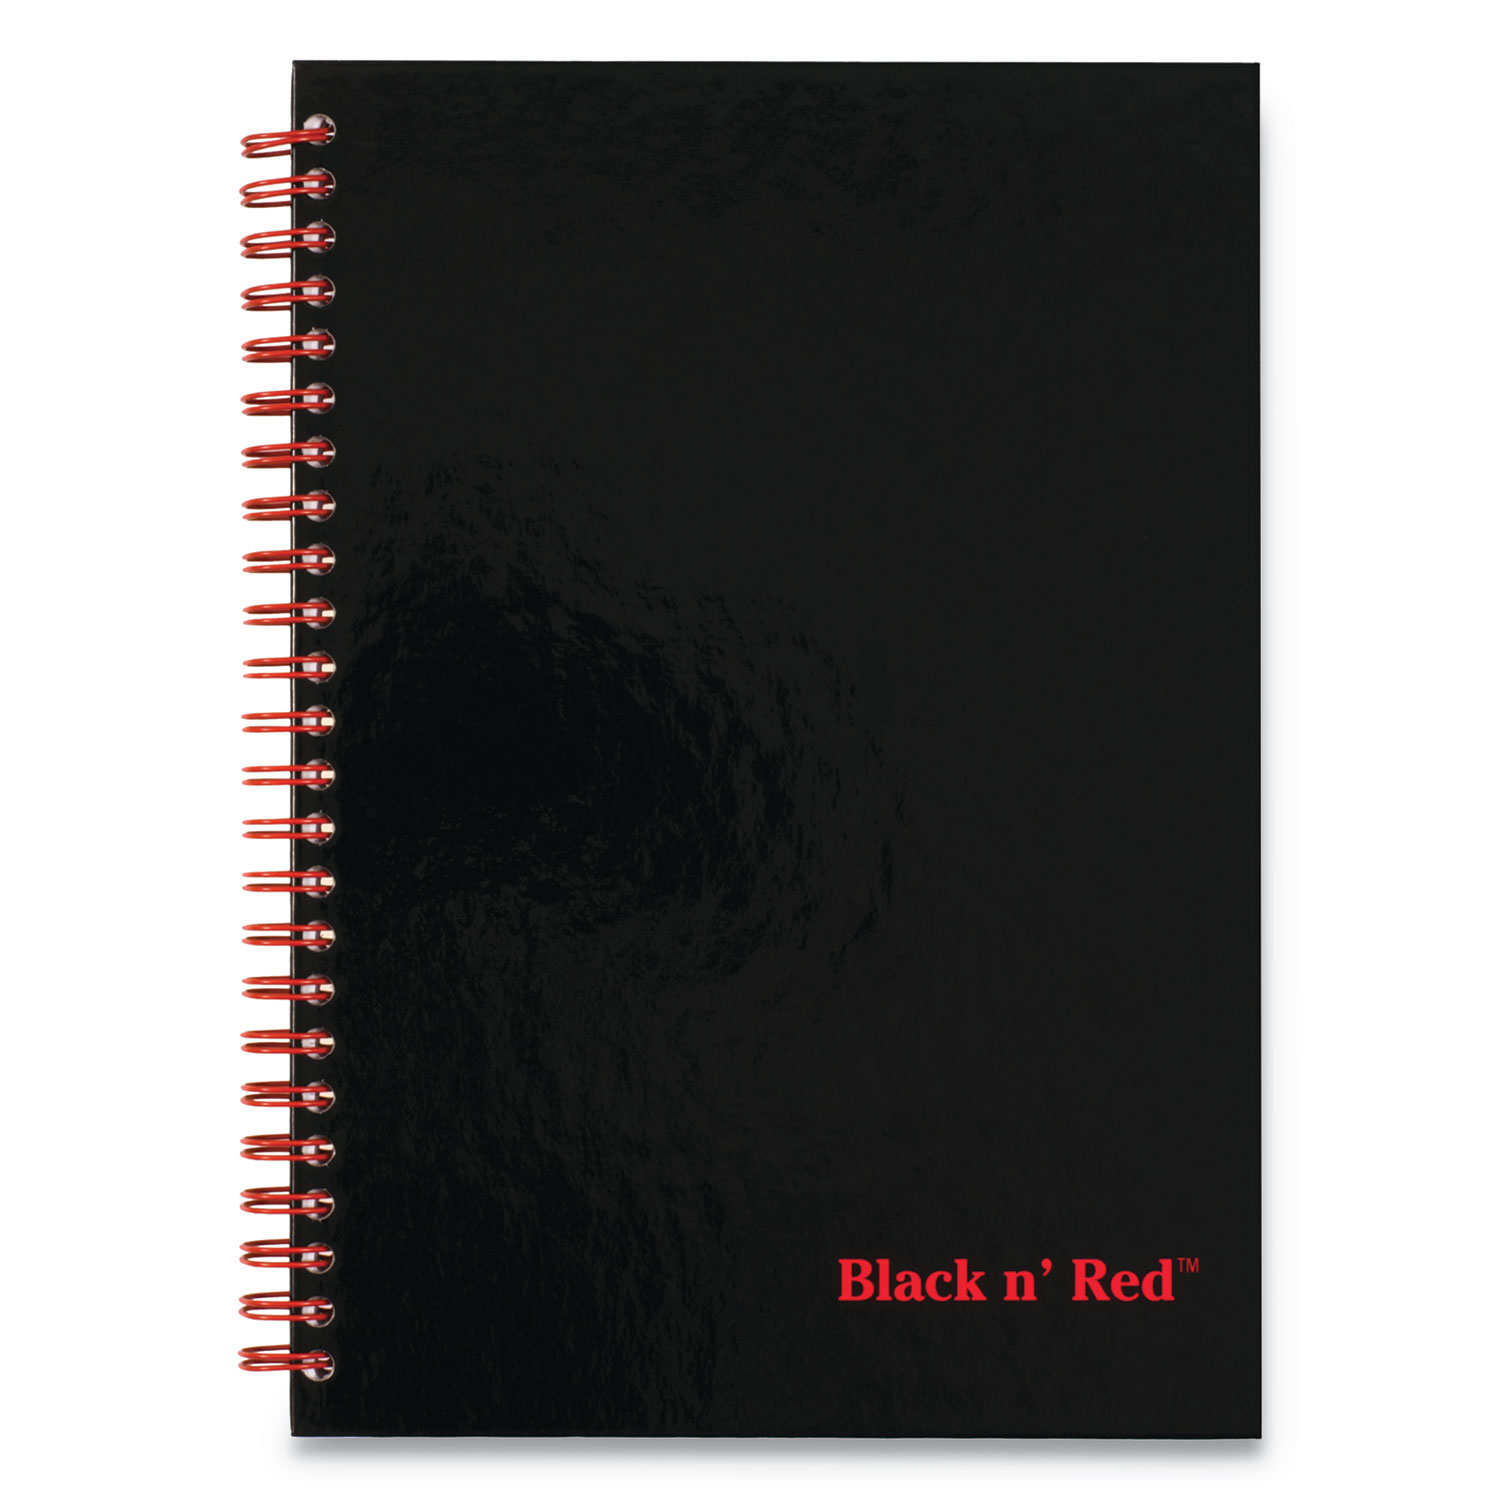  Black n' Red 400110532 Hardcover Twinwire Notebooks, 1 Subject, Wide/Legal Rule, Black/Red Cover, 9.88 x 7, 70 Sheets (JDK400110532) 